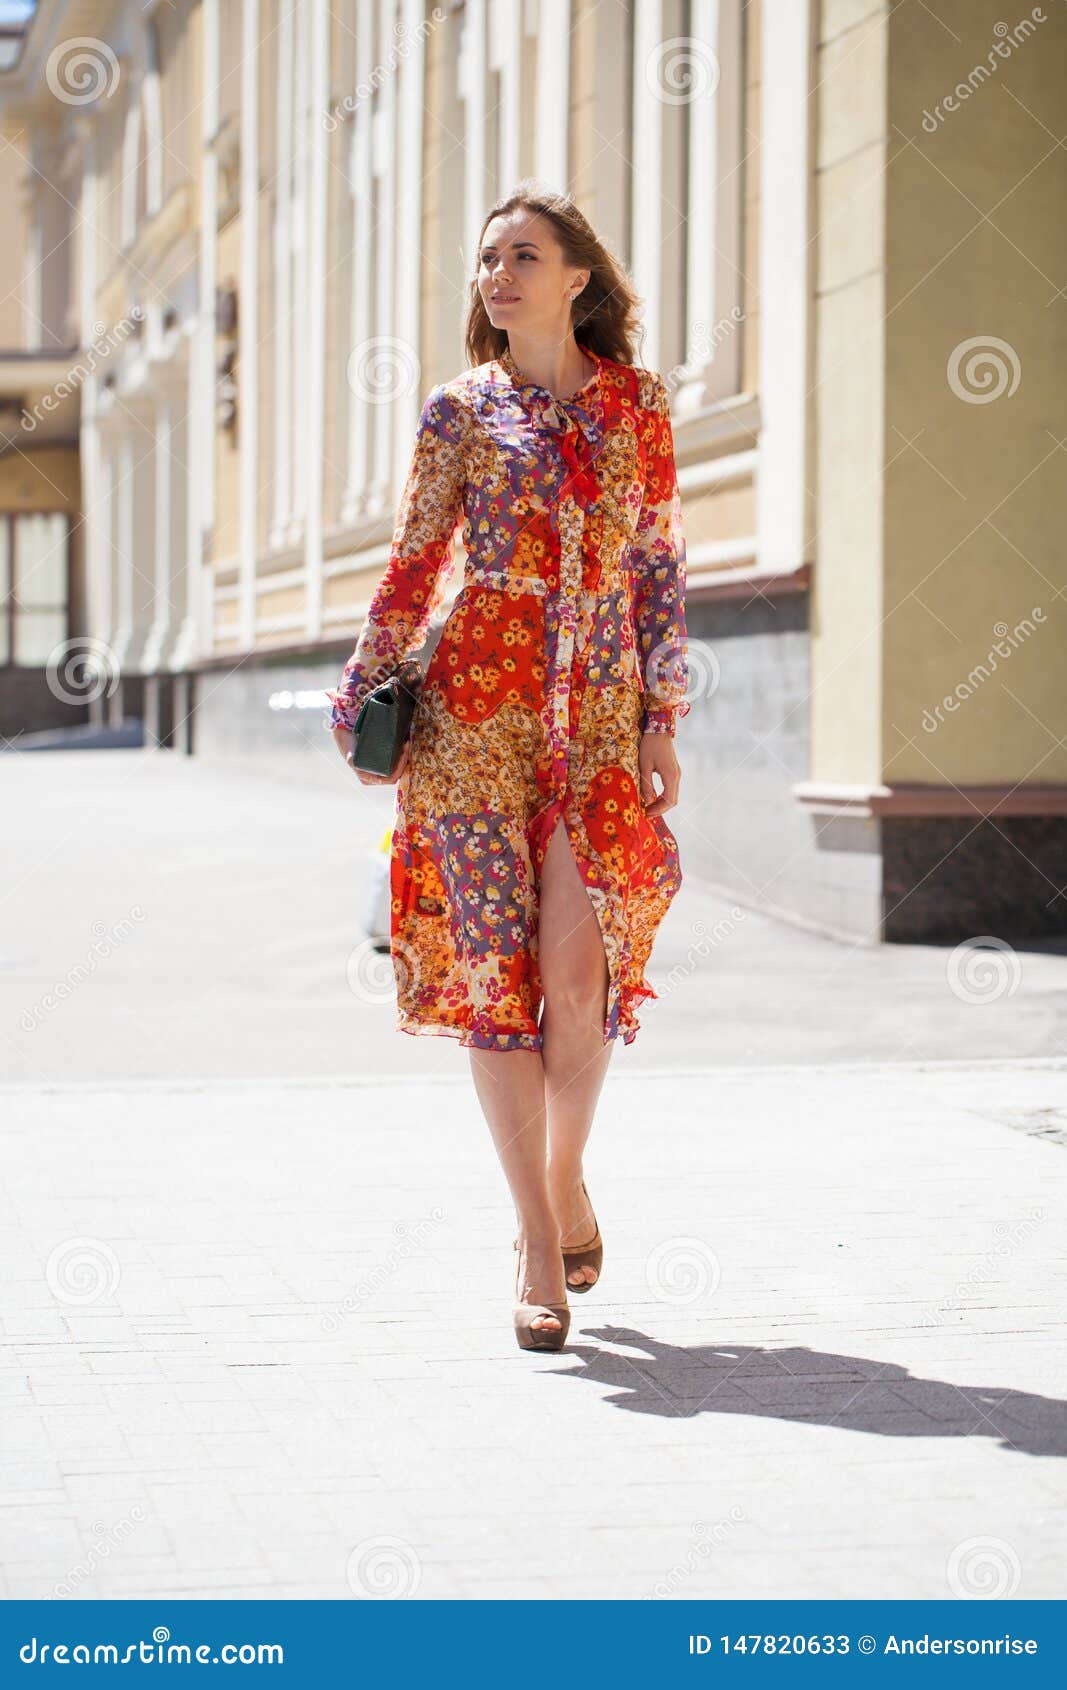 Portrait Full Length of Young Beautiful Woman Stock Image - Image of ...